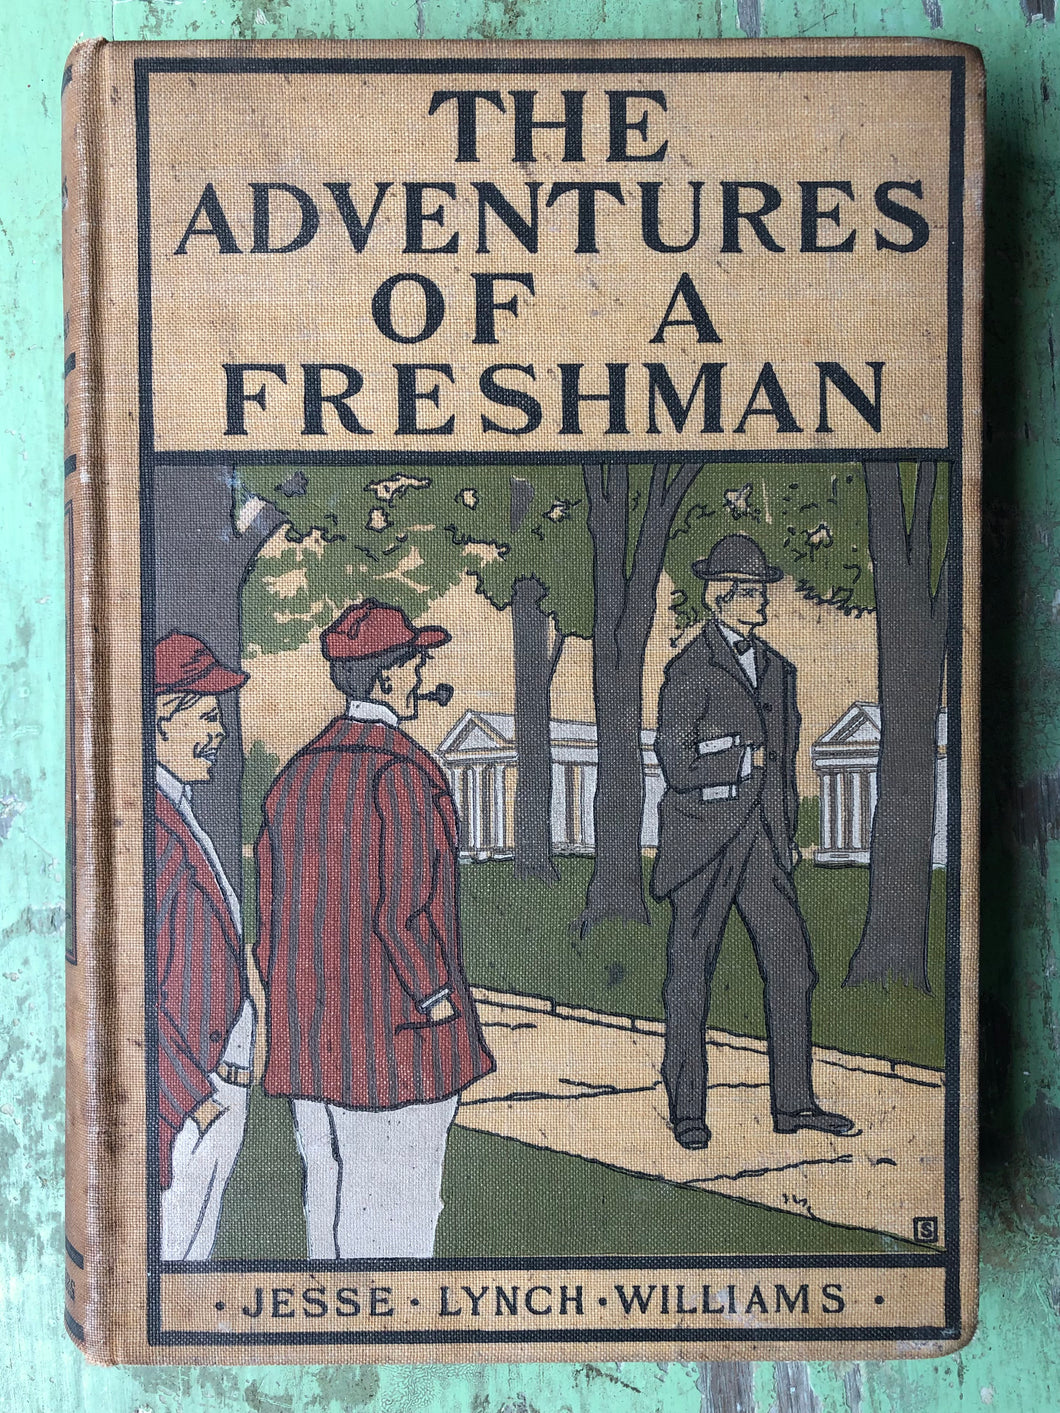 The Adventures of a Freshman by Jesse Lynch Williams